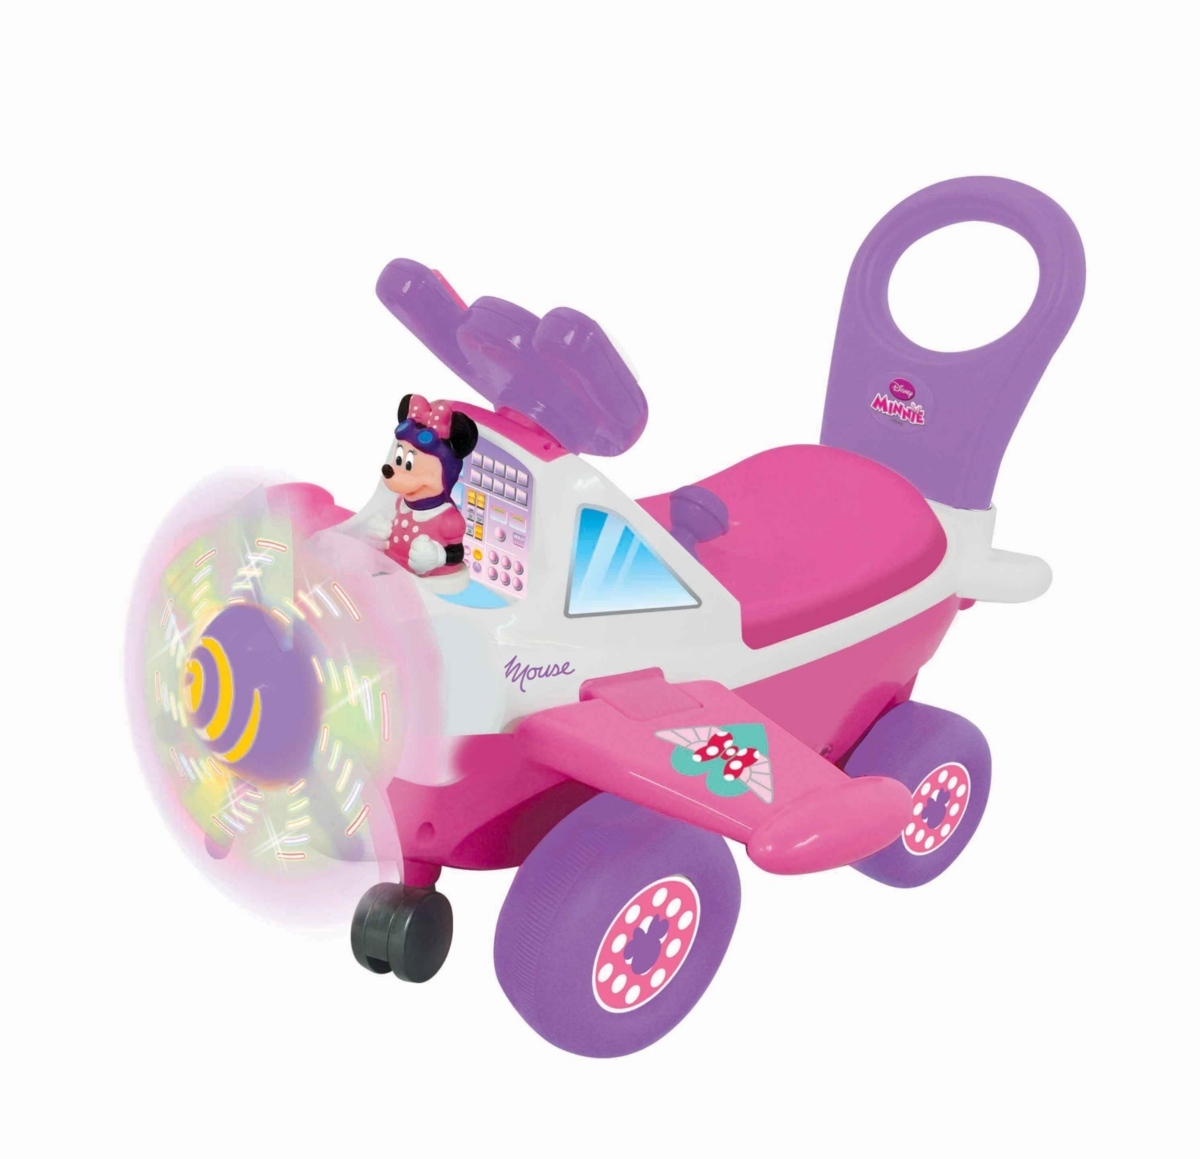 Kiddieland Disney Minnie Mouse Plane Light And Sound Activity Ride On In Multi